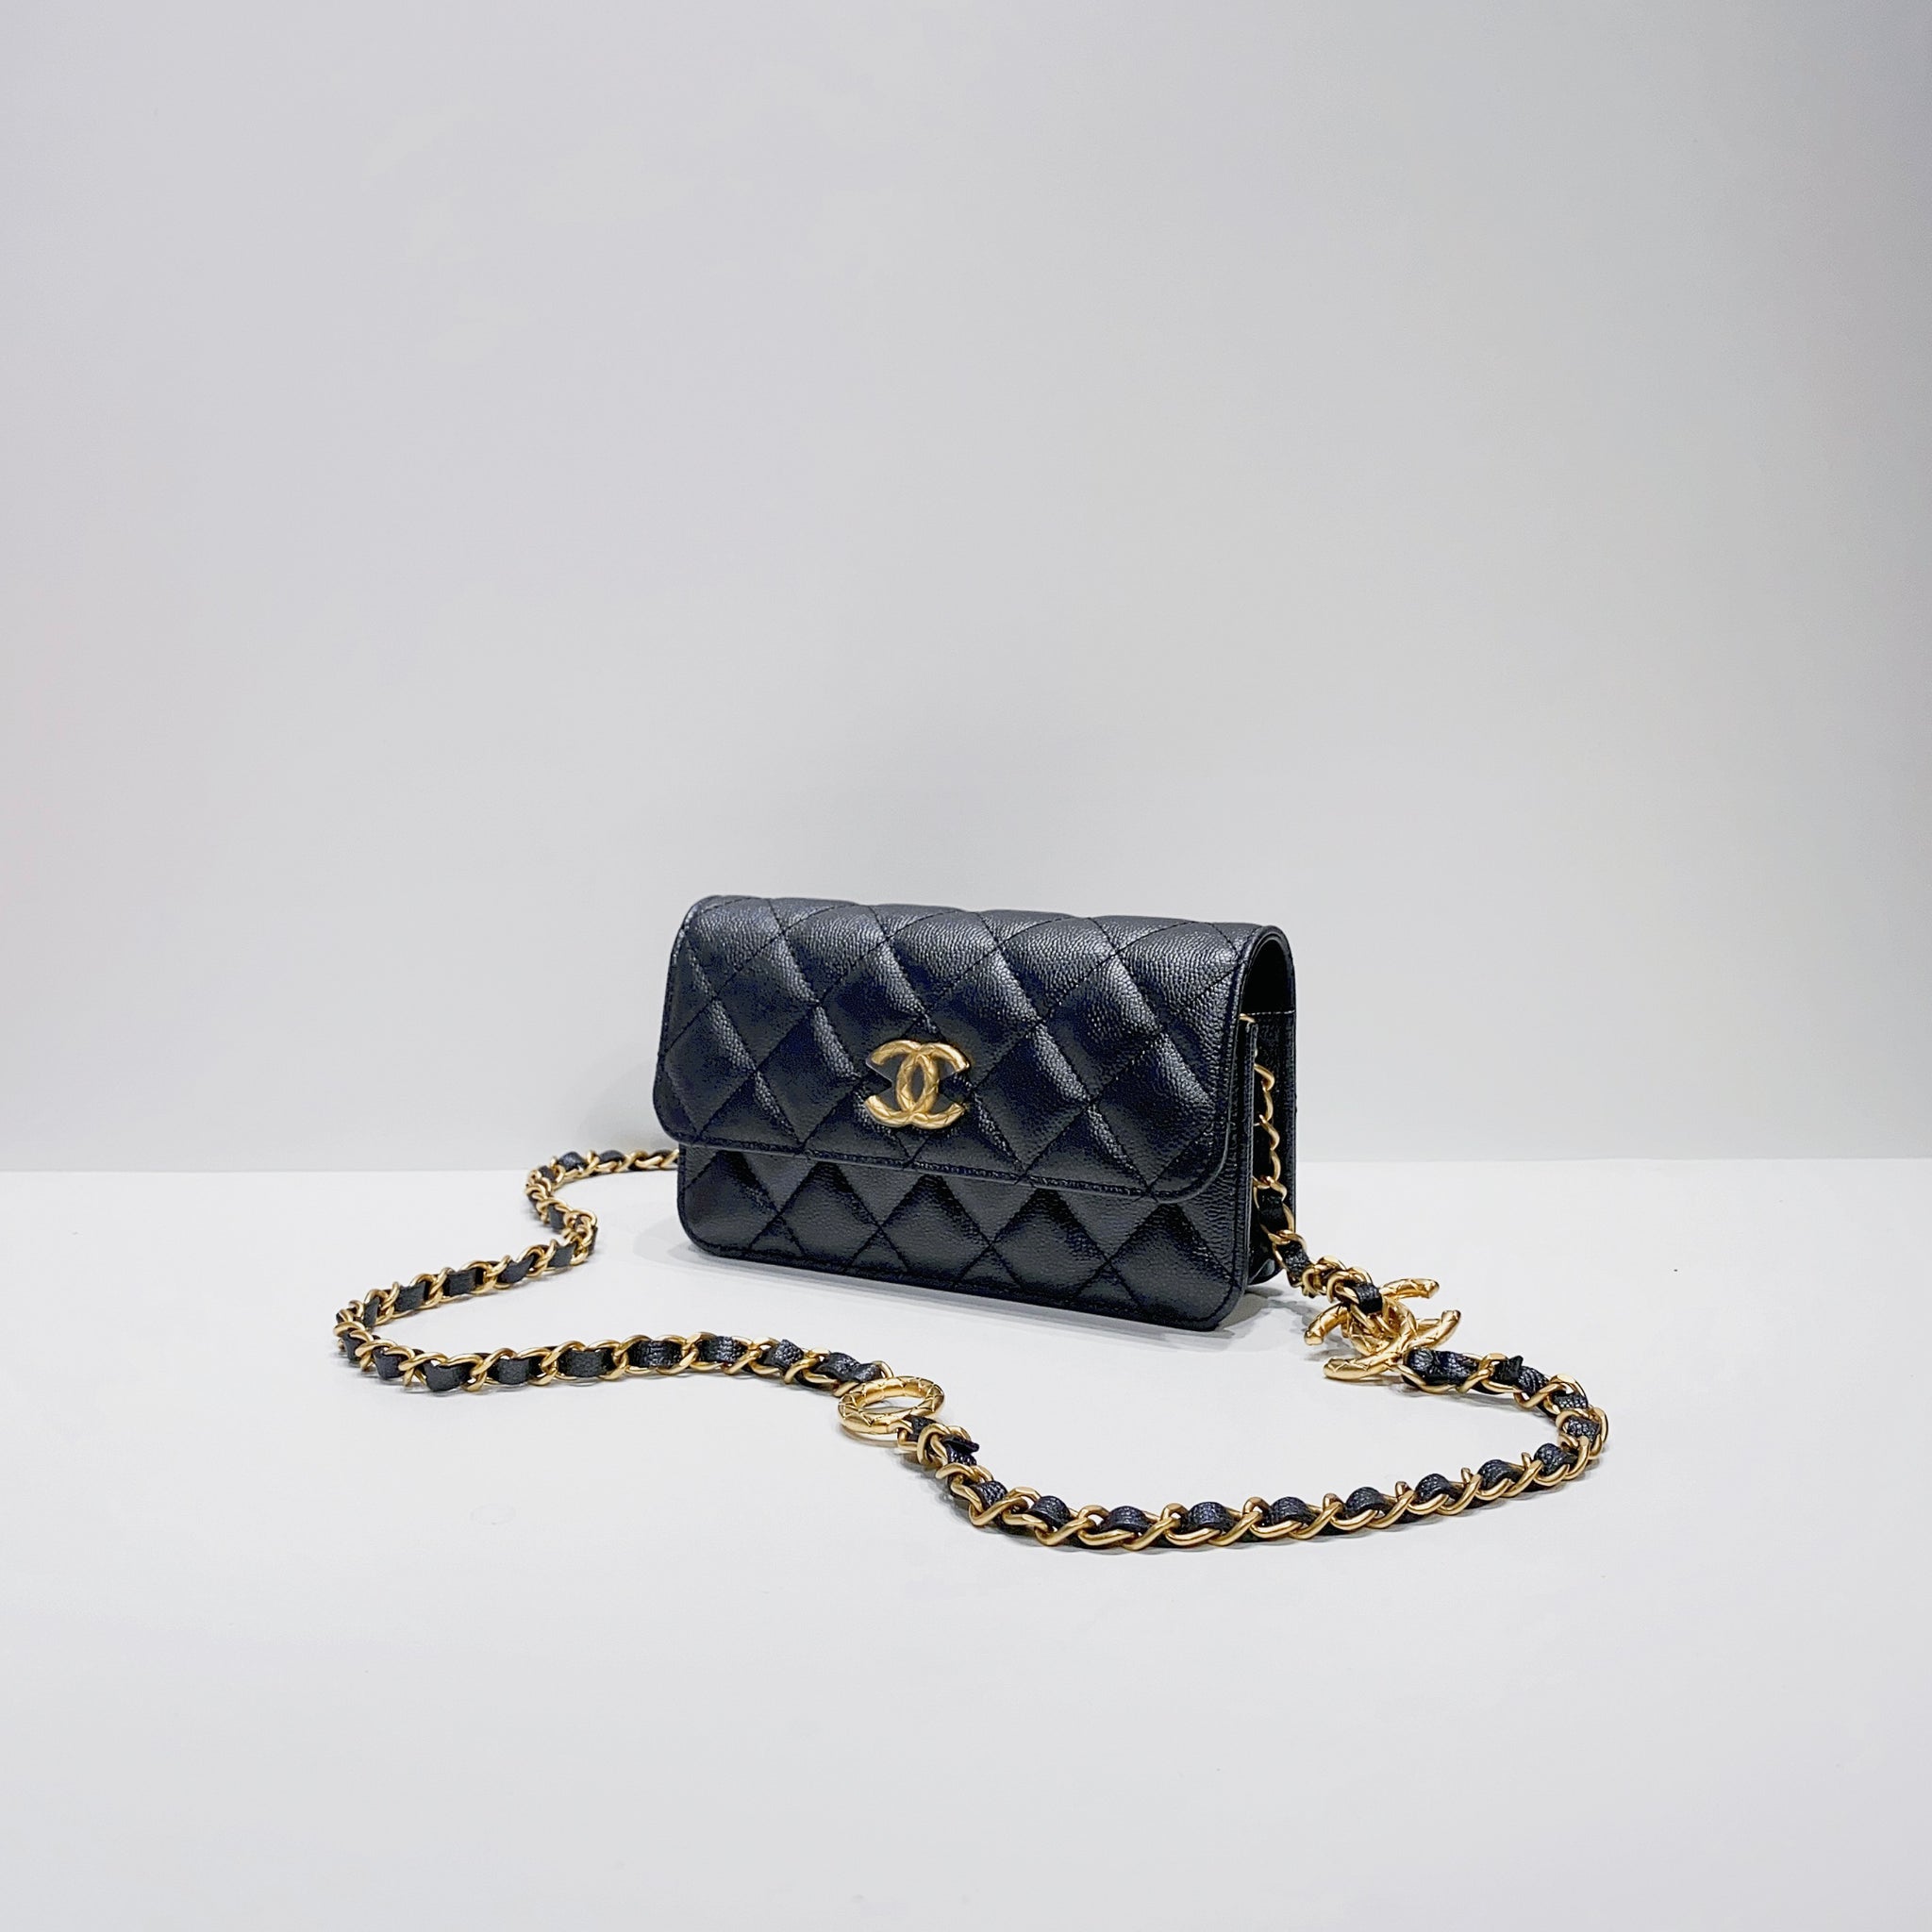 Chanel Black Quilted Caviar Phone Holder Crossbody